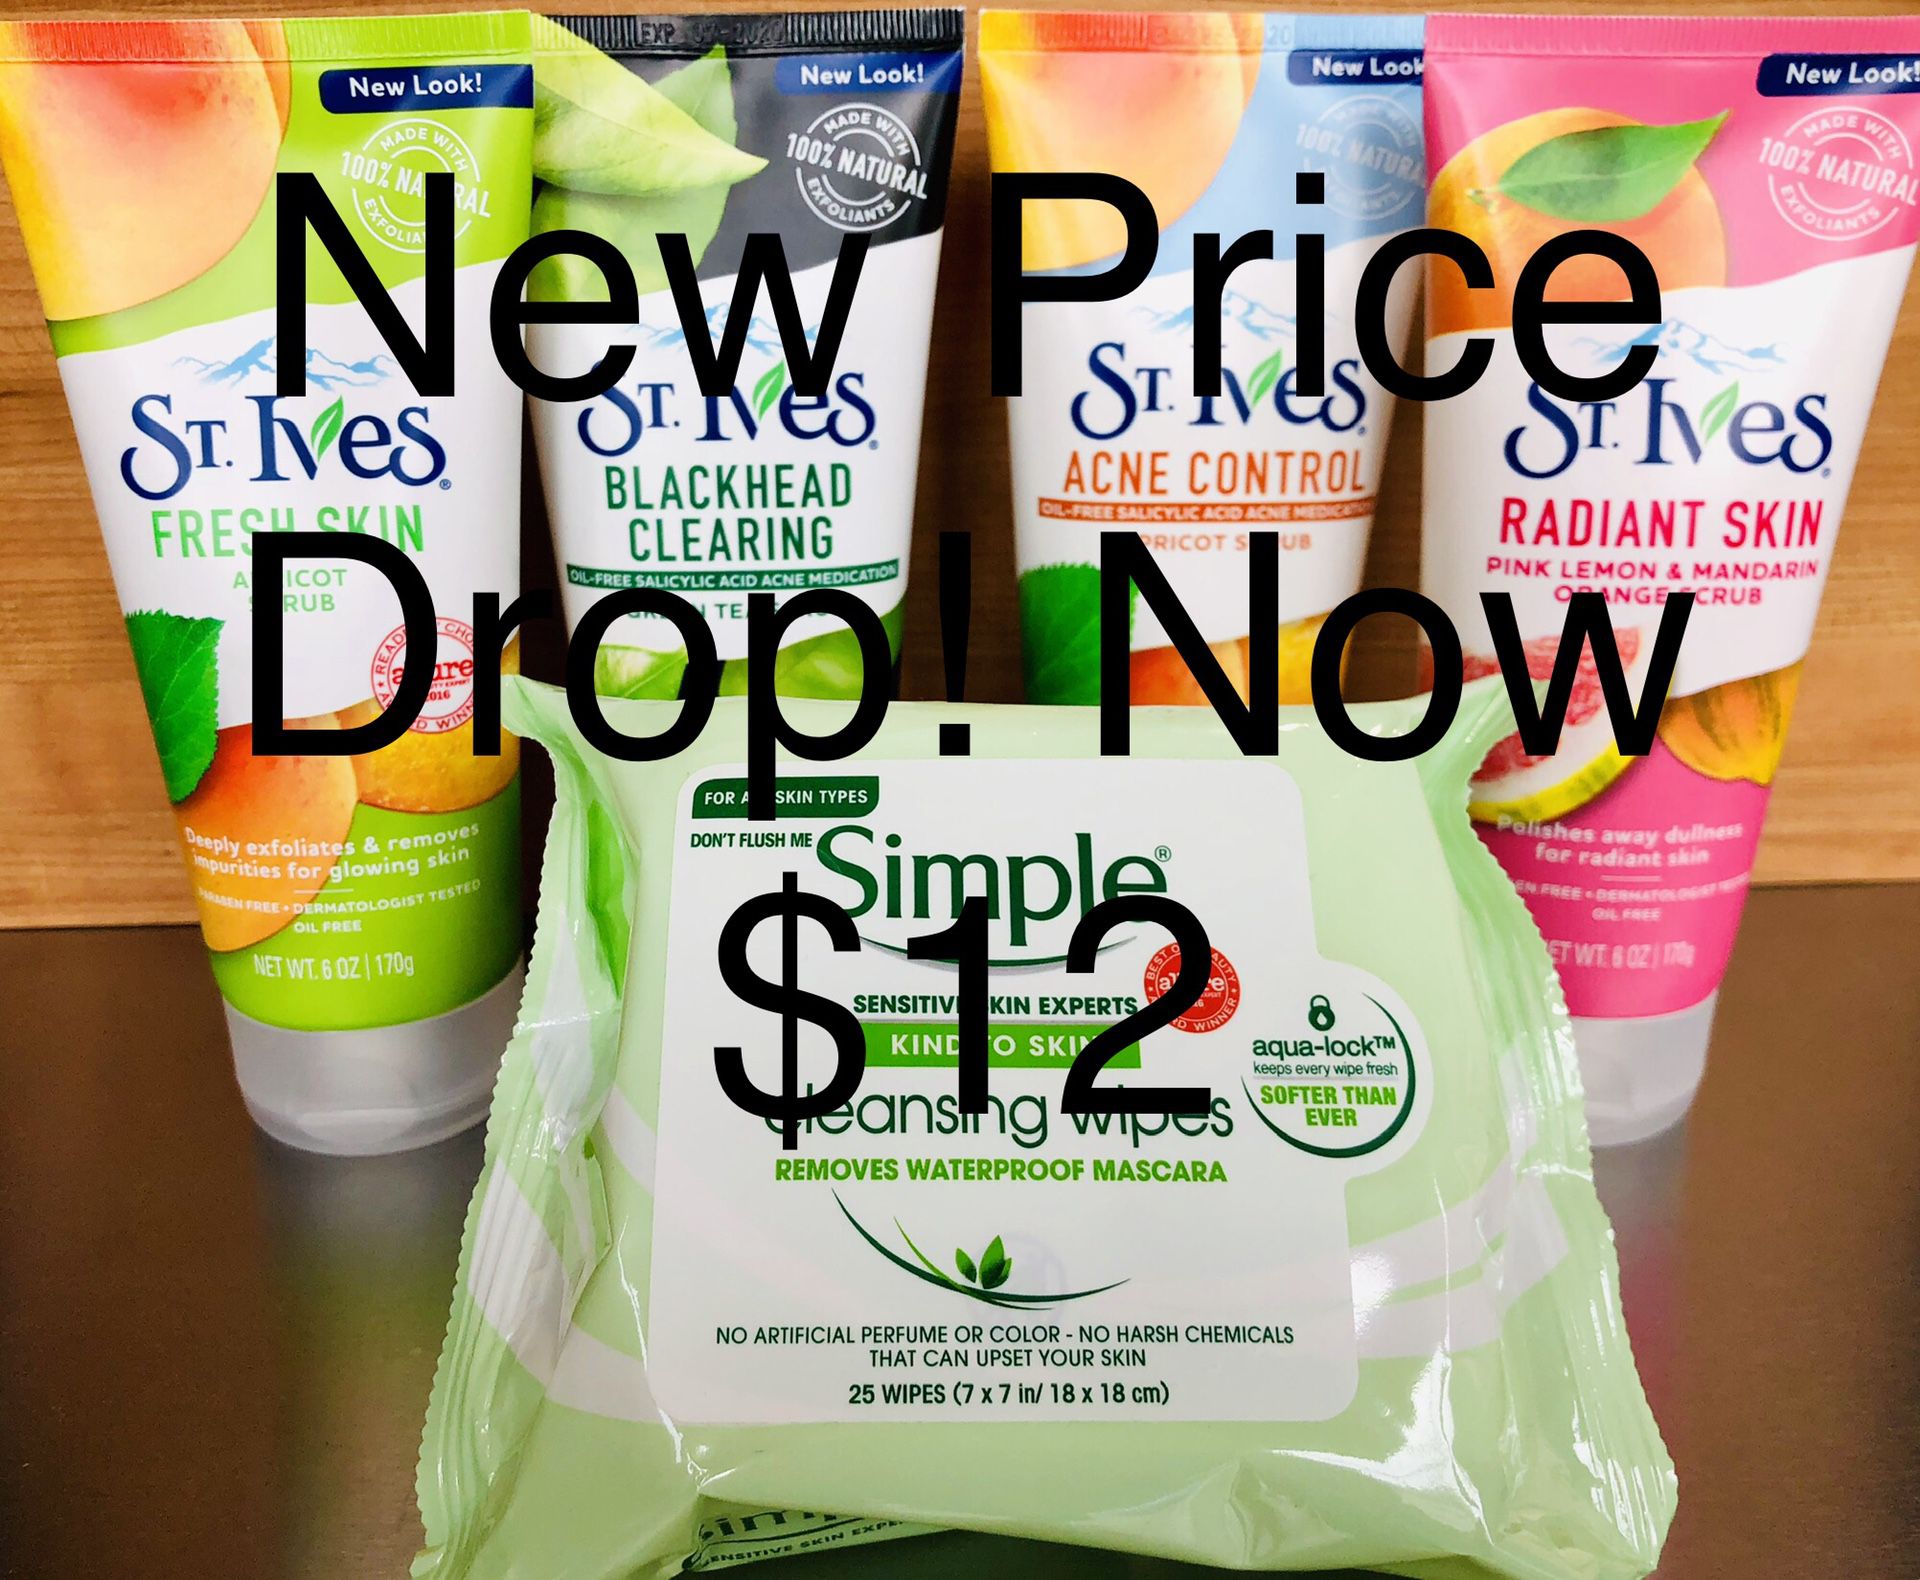 $12 St. Ives scrubs & one Simple cleansing wipes - Now $12 for all 5 items